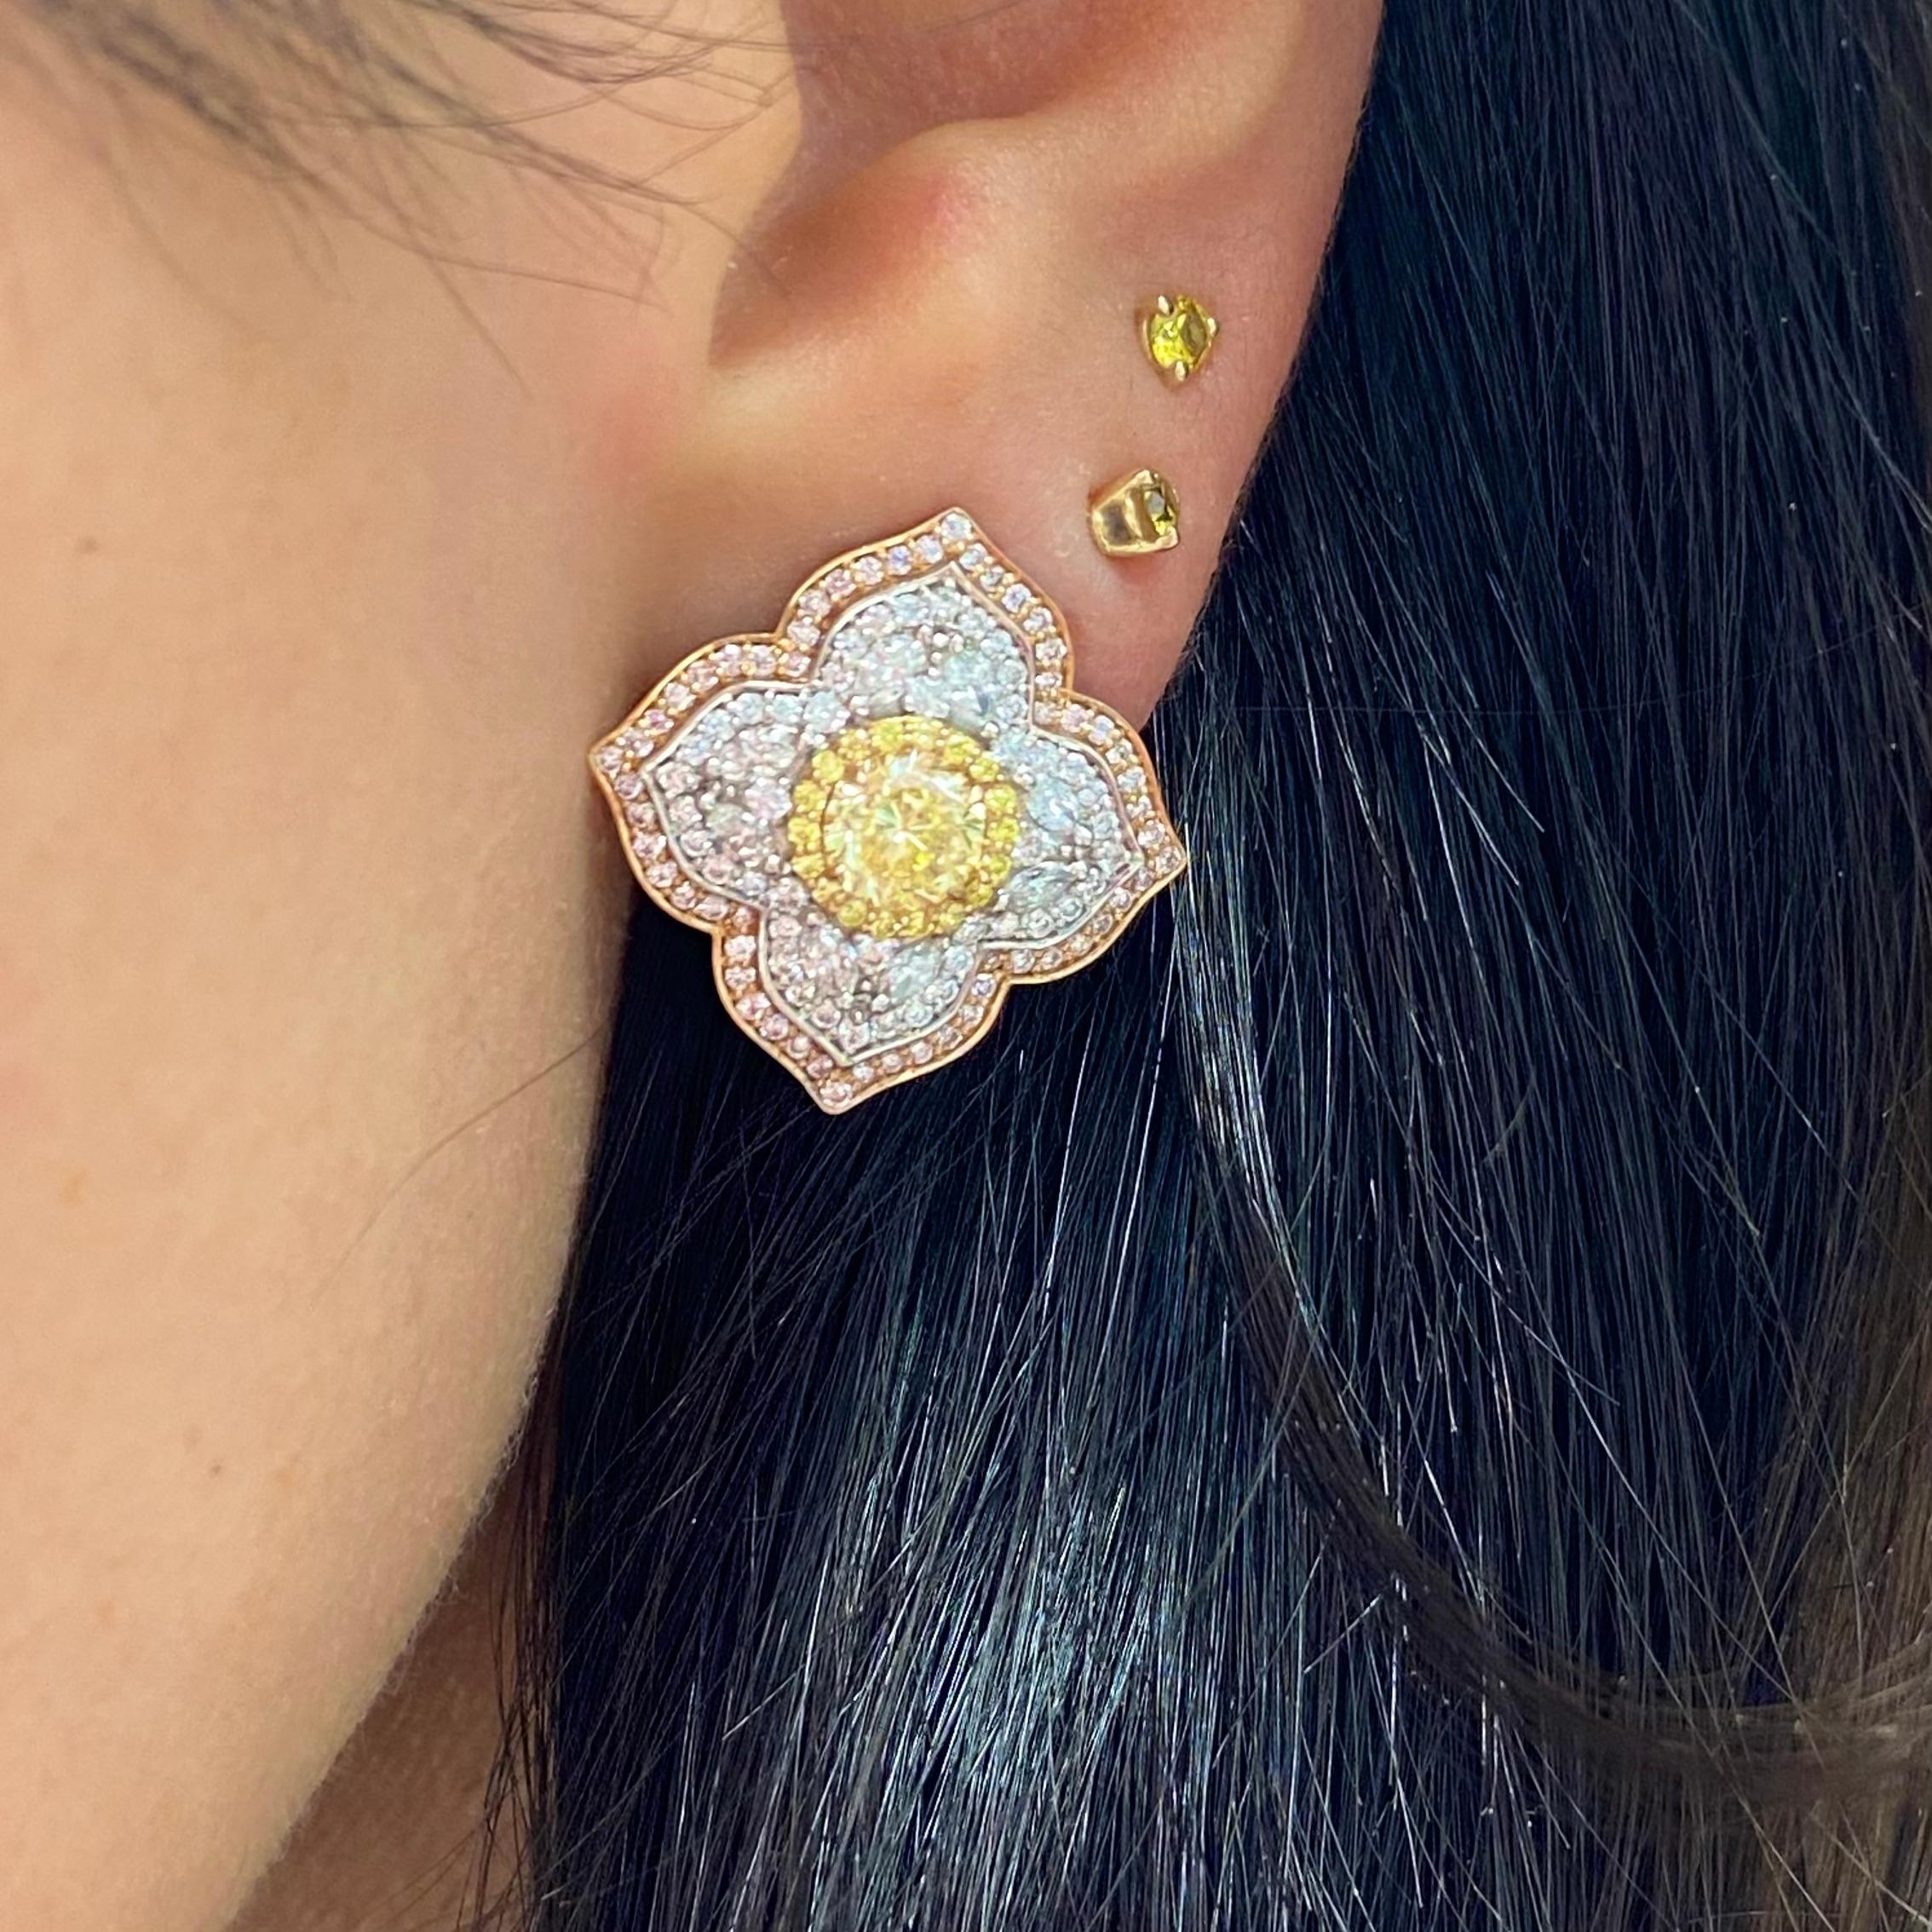 0.76 and 0.71 Carat Center Diamonds
Fancy Light Yellow 
Round Diamond
Additional 1.5 Carats of yellow and white surrounding diamonds
Set in 18k White Gold
2 GIA Certified Center Diamonds
Handmade in NYC 


This piece can be viewed before purchase in